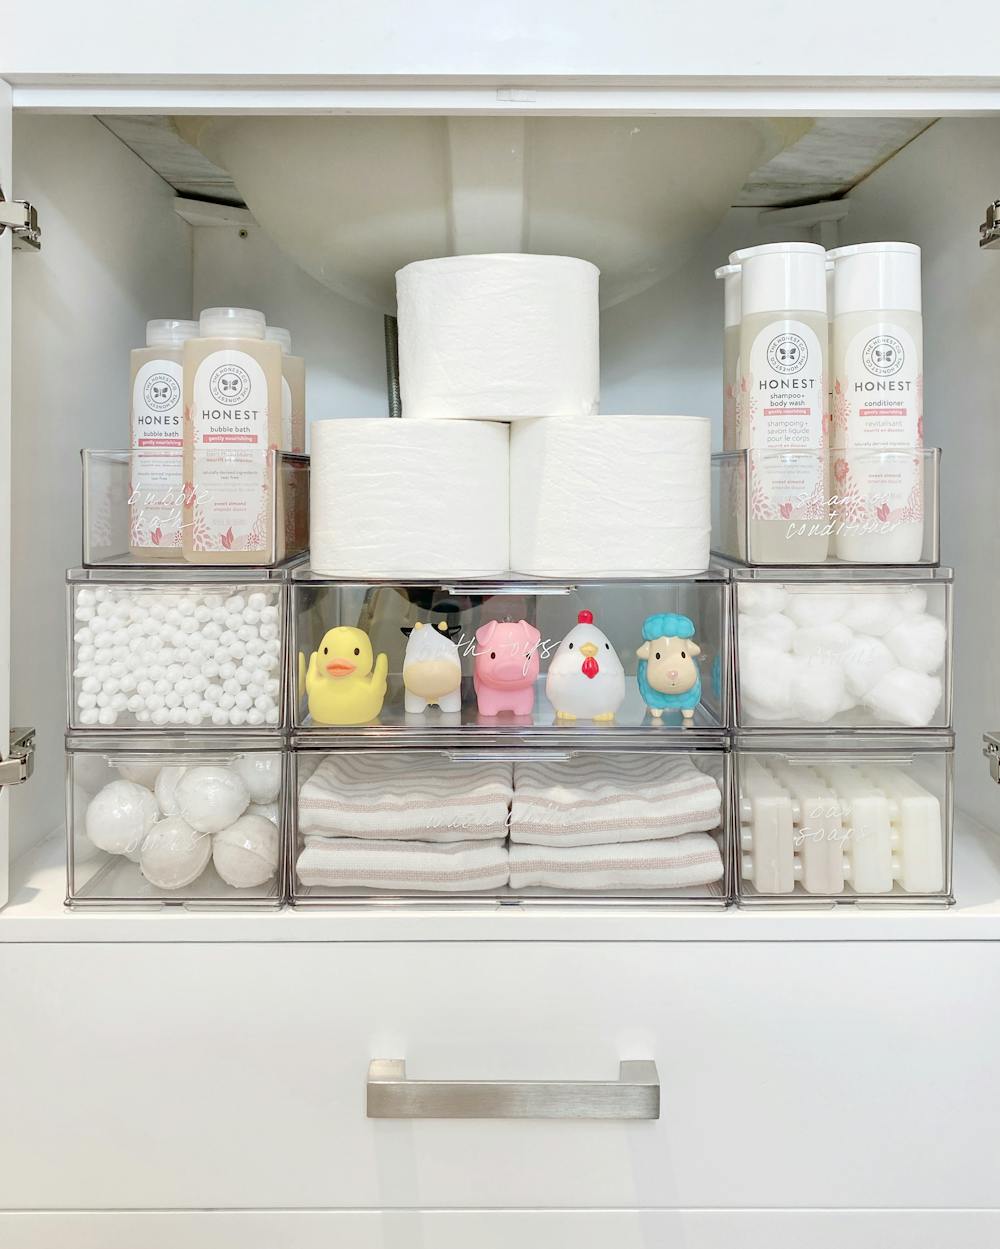 Bathroom Organization Tips with The Home Edit Container Store  Bathroom  organisation, Bathroom storage organization, The home edit